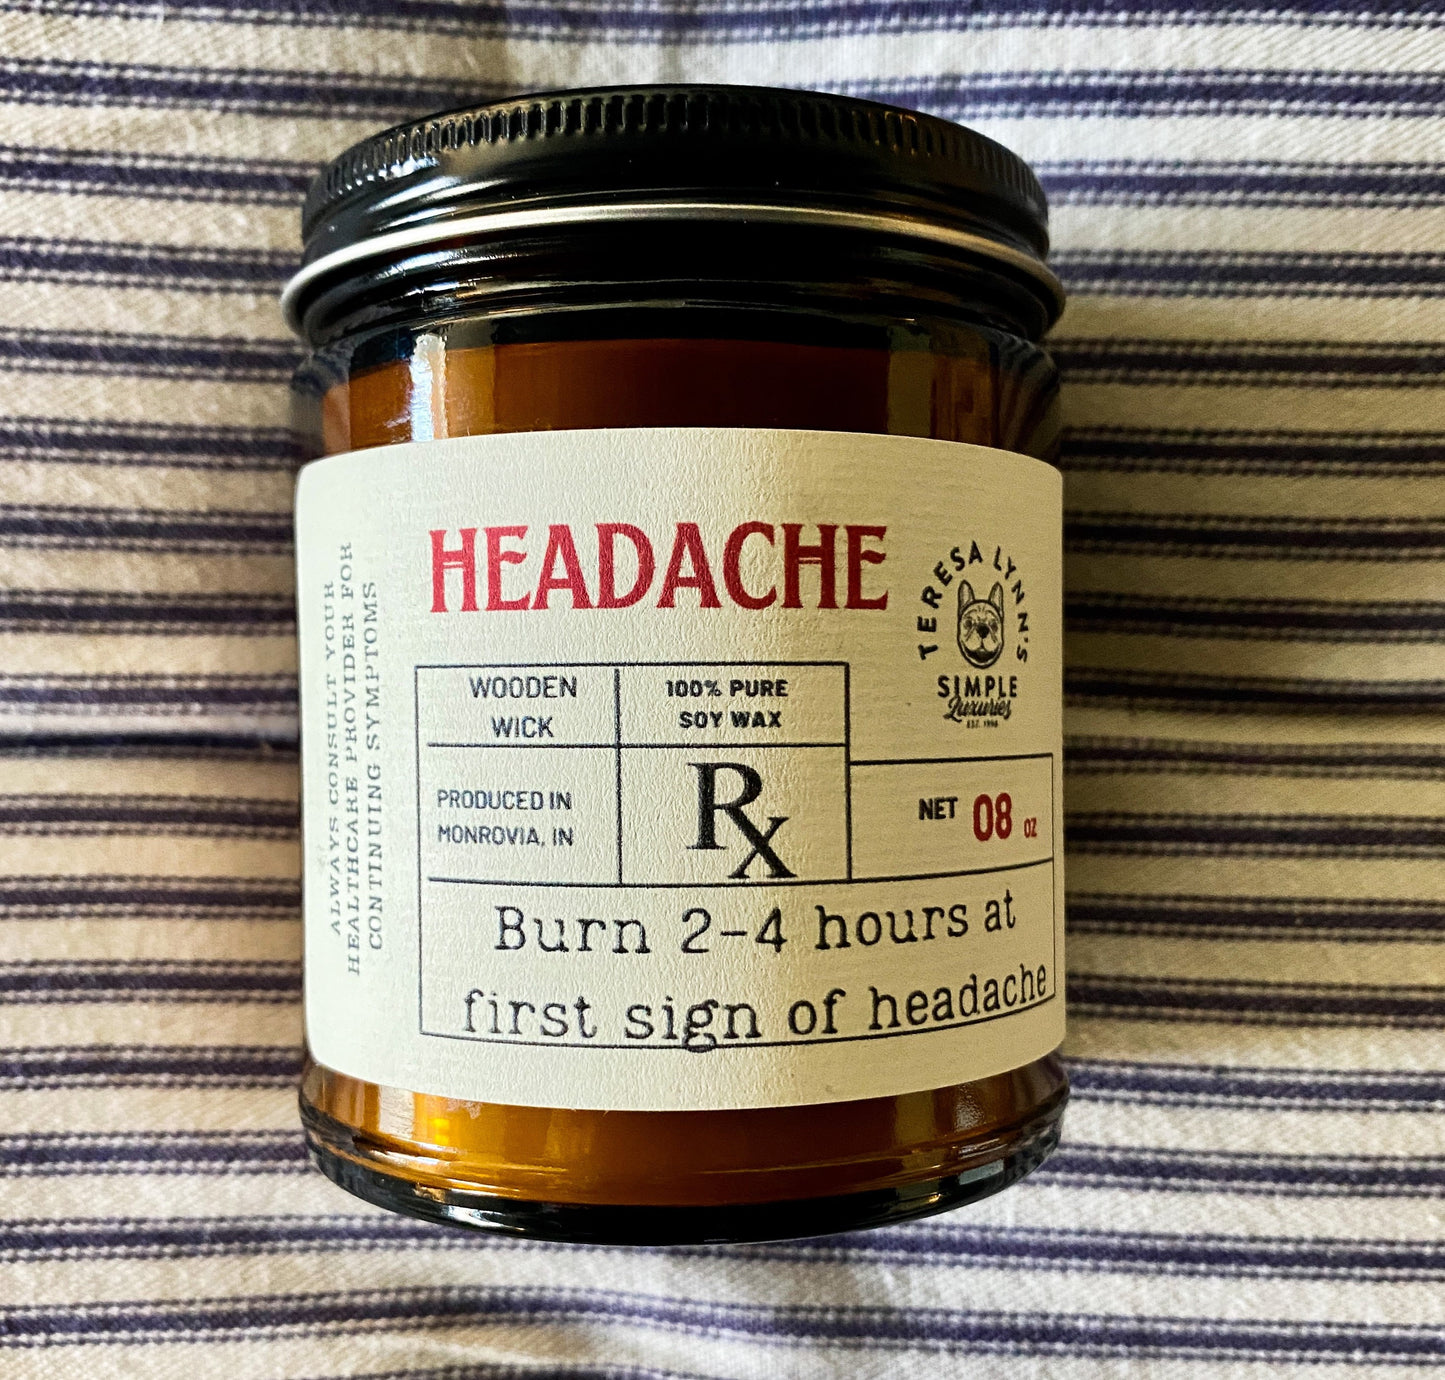 Headache, wooden wick, aromatherapy candle, soy wax candle